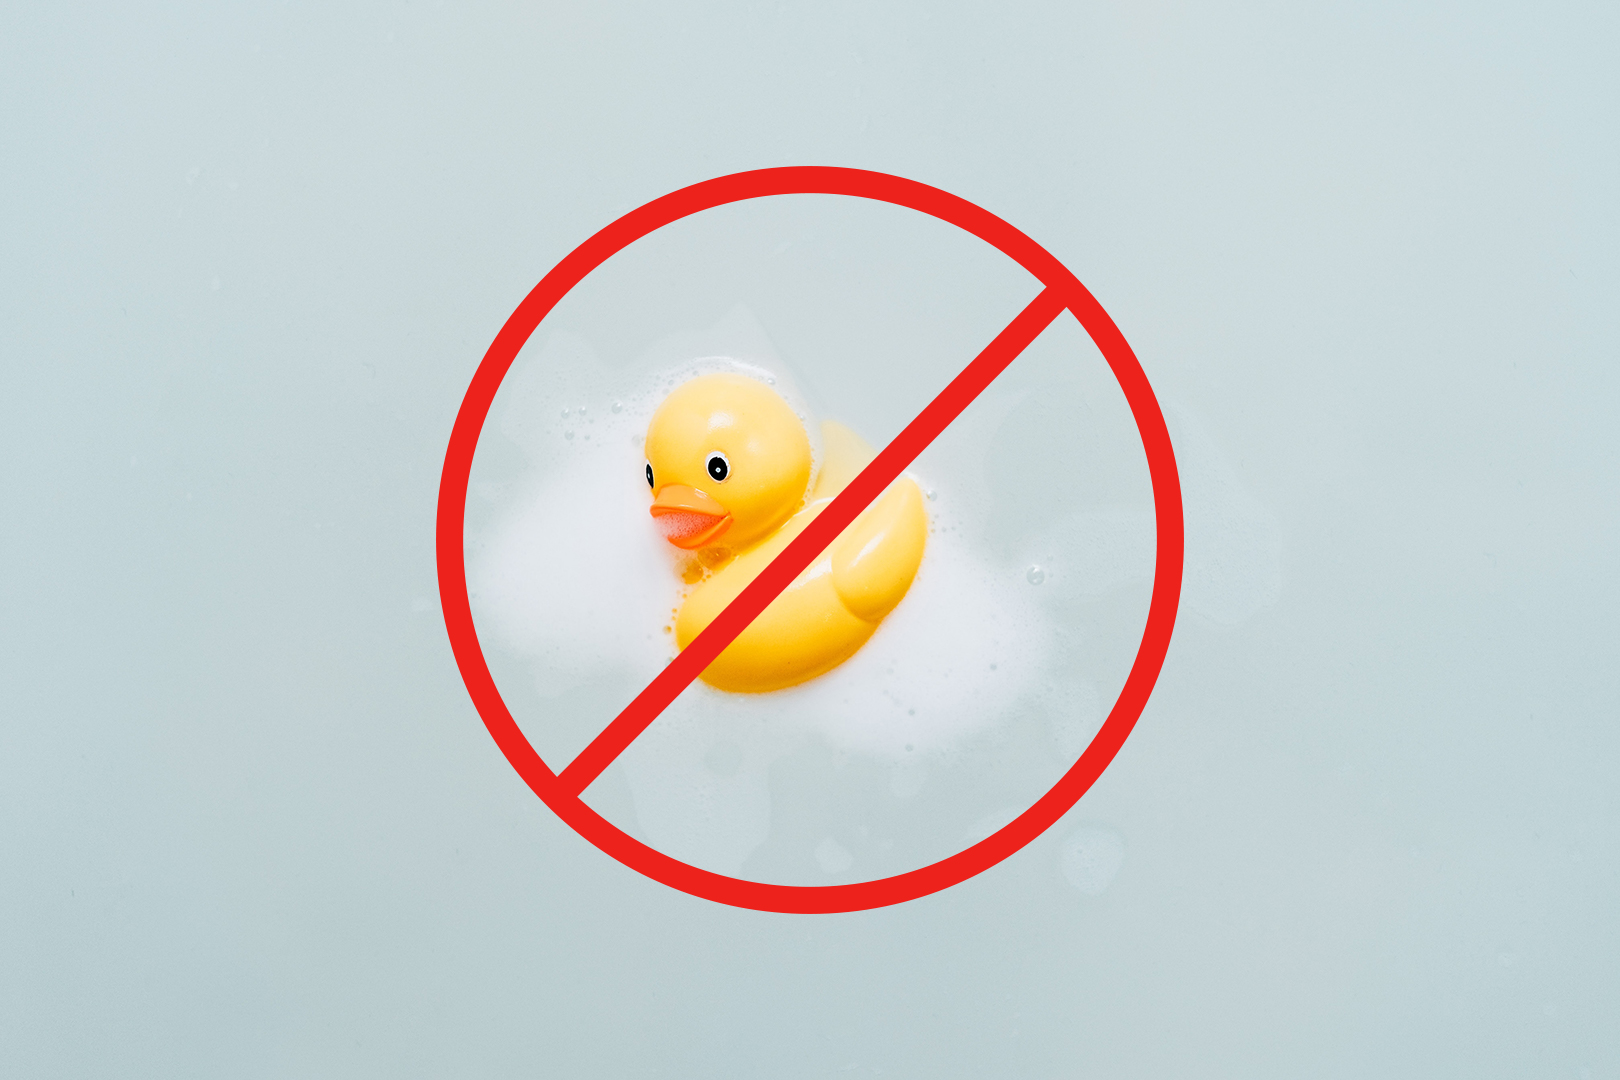 Rubber Ducky: Learning About the Keystroke Injection